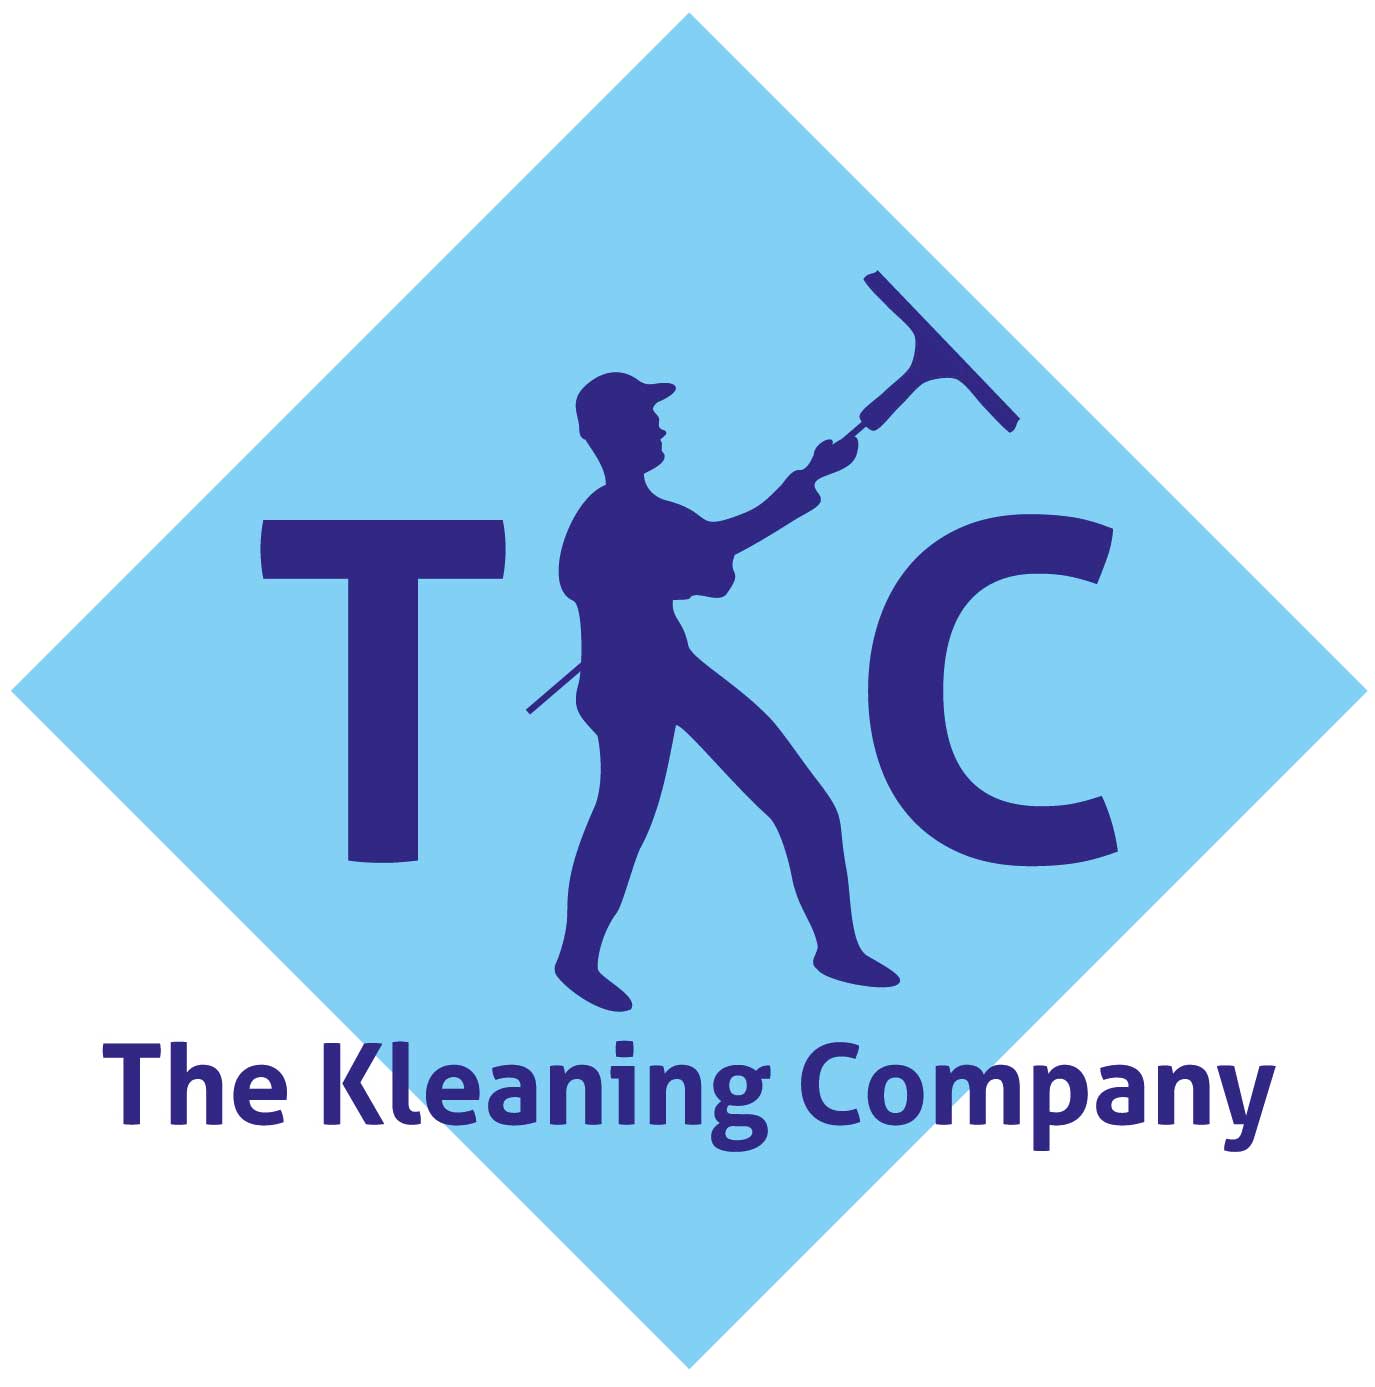 The Kleaning Company Ltd